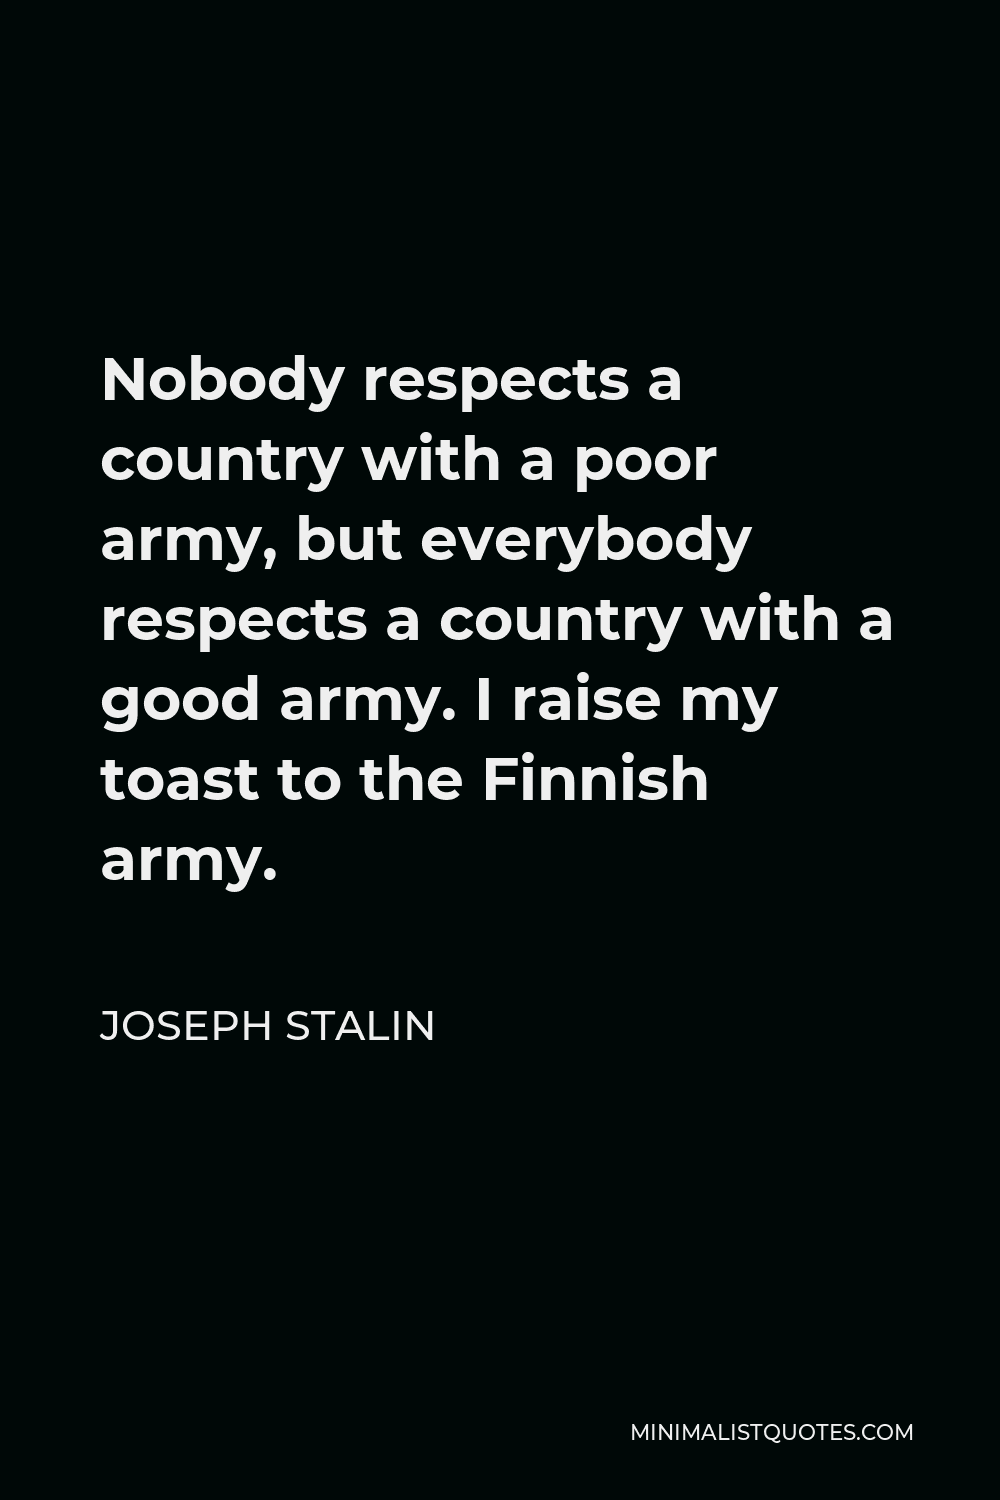 Joseph Stalin Quote - Nobody respects a country with a poor army, but everybody respects a country with a good army. I raise my toast to the Finnish army.